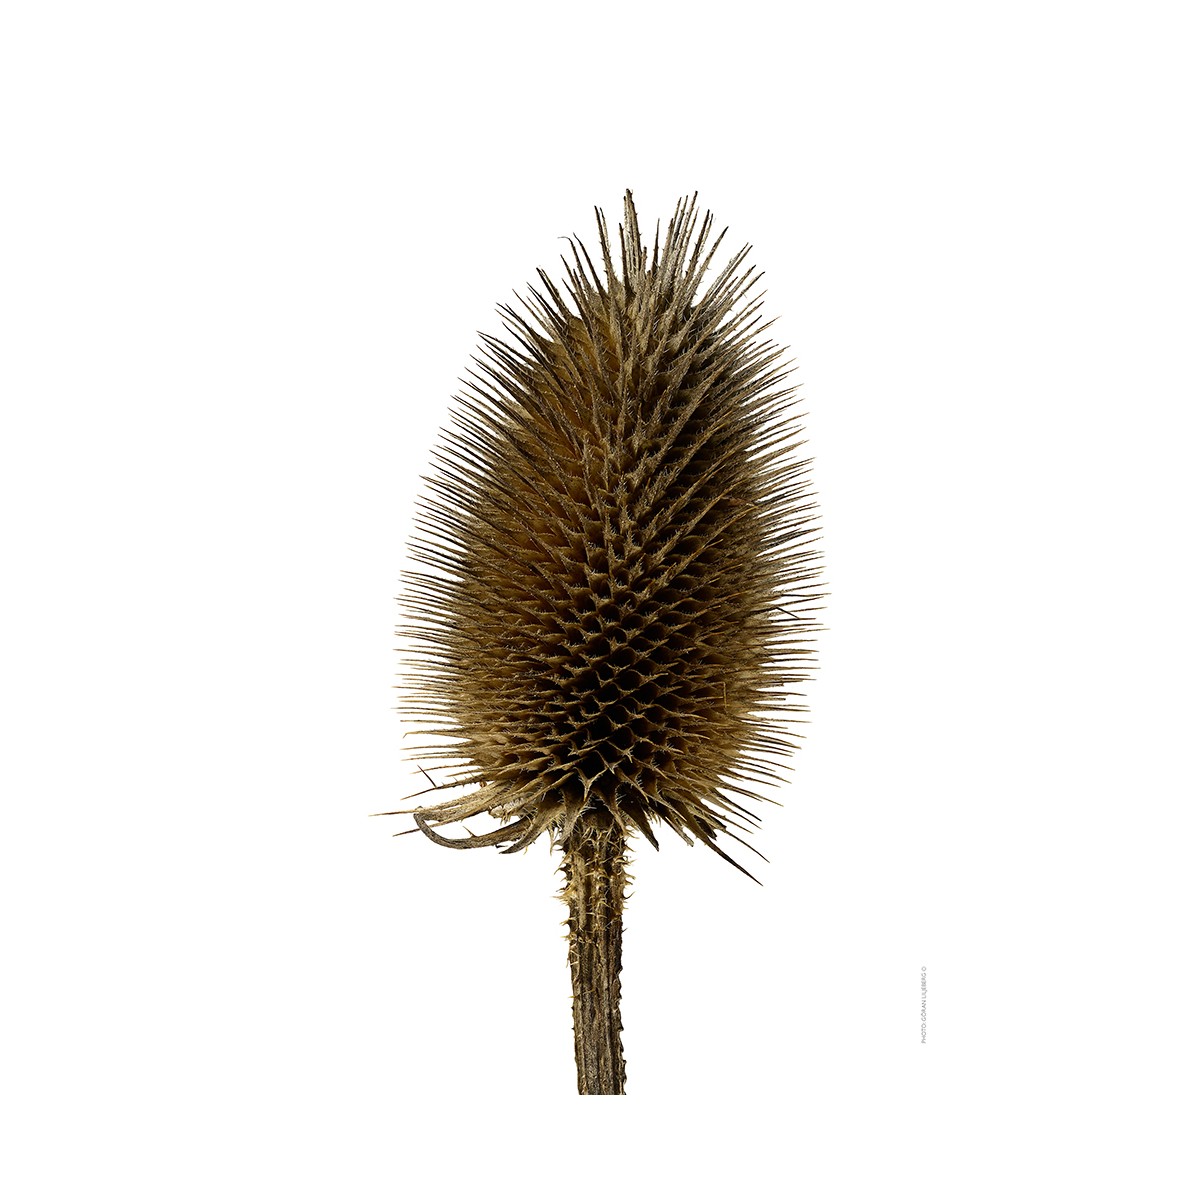 Wild teasel, withered (Dipsacus fullonum)